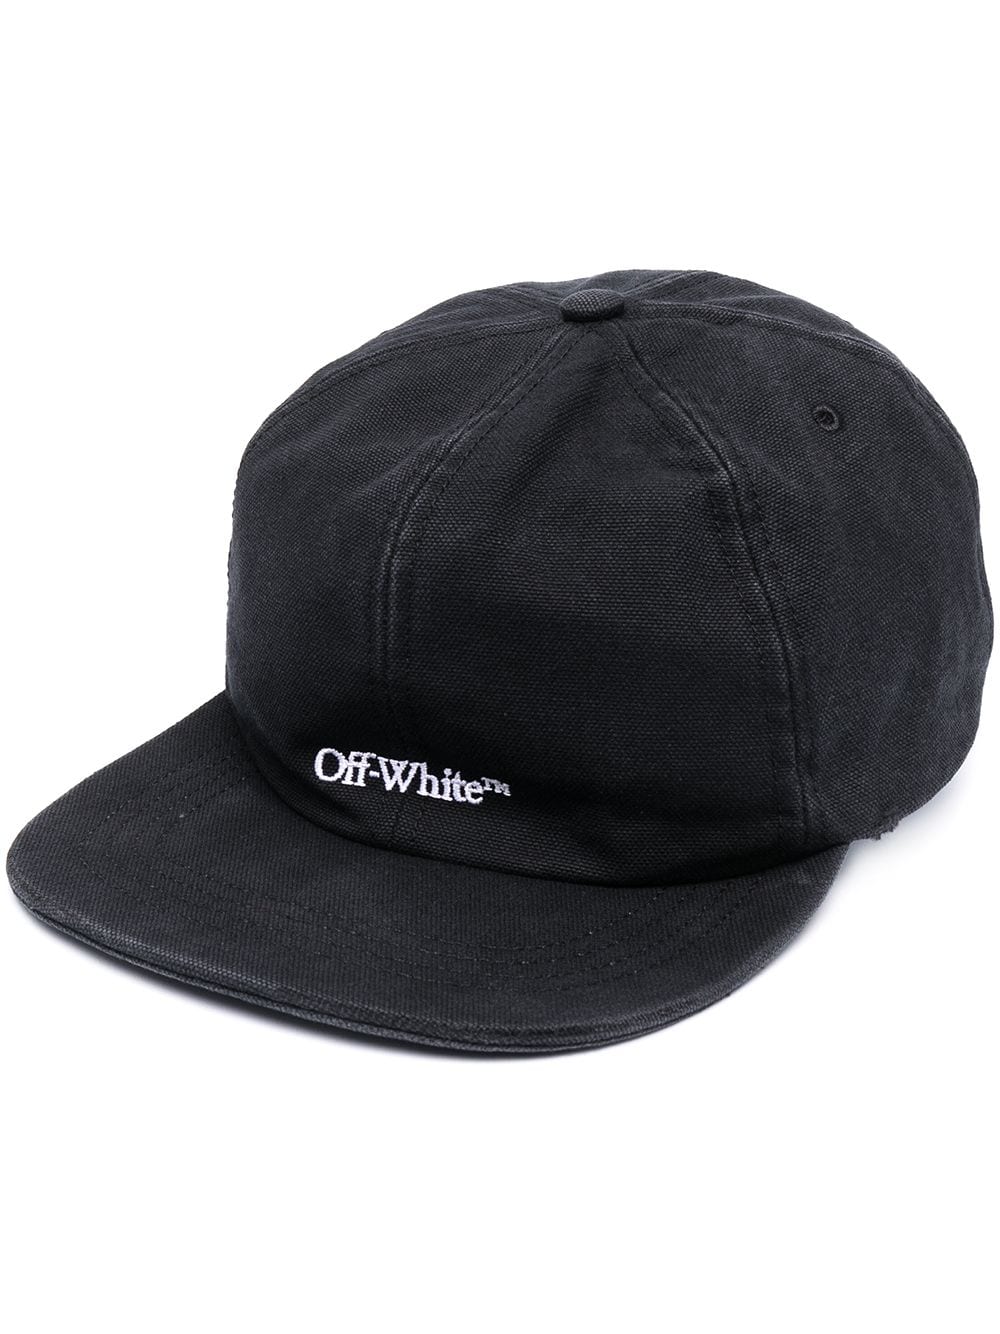 Buy & Sell Off-White Headwear Accessories